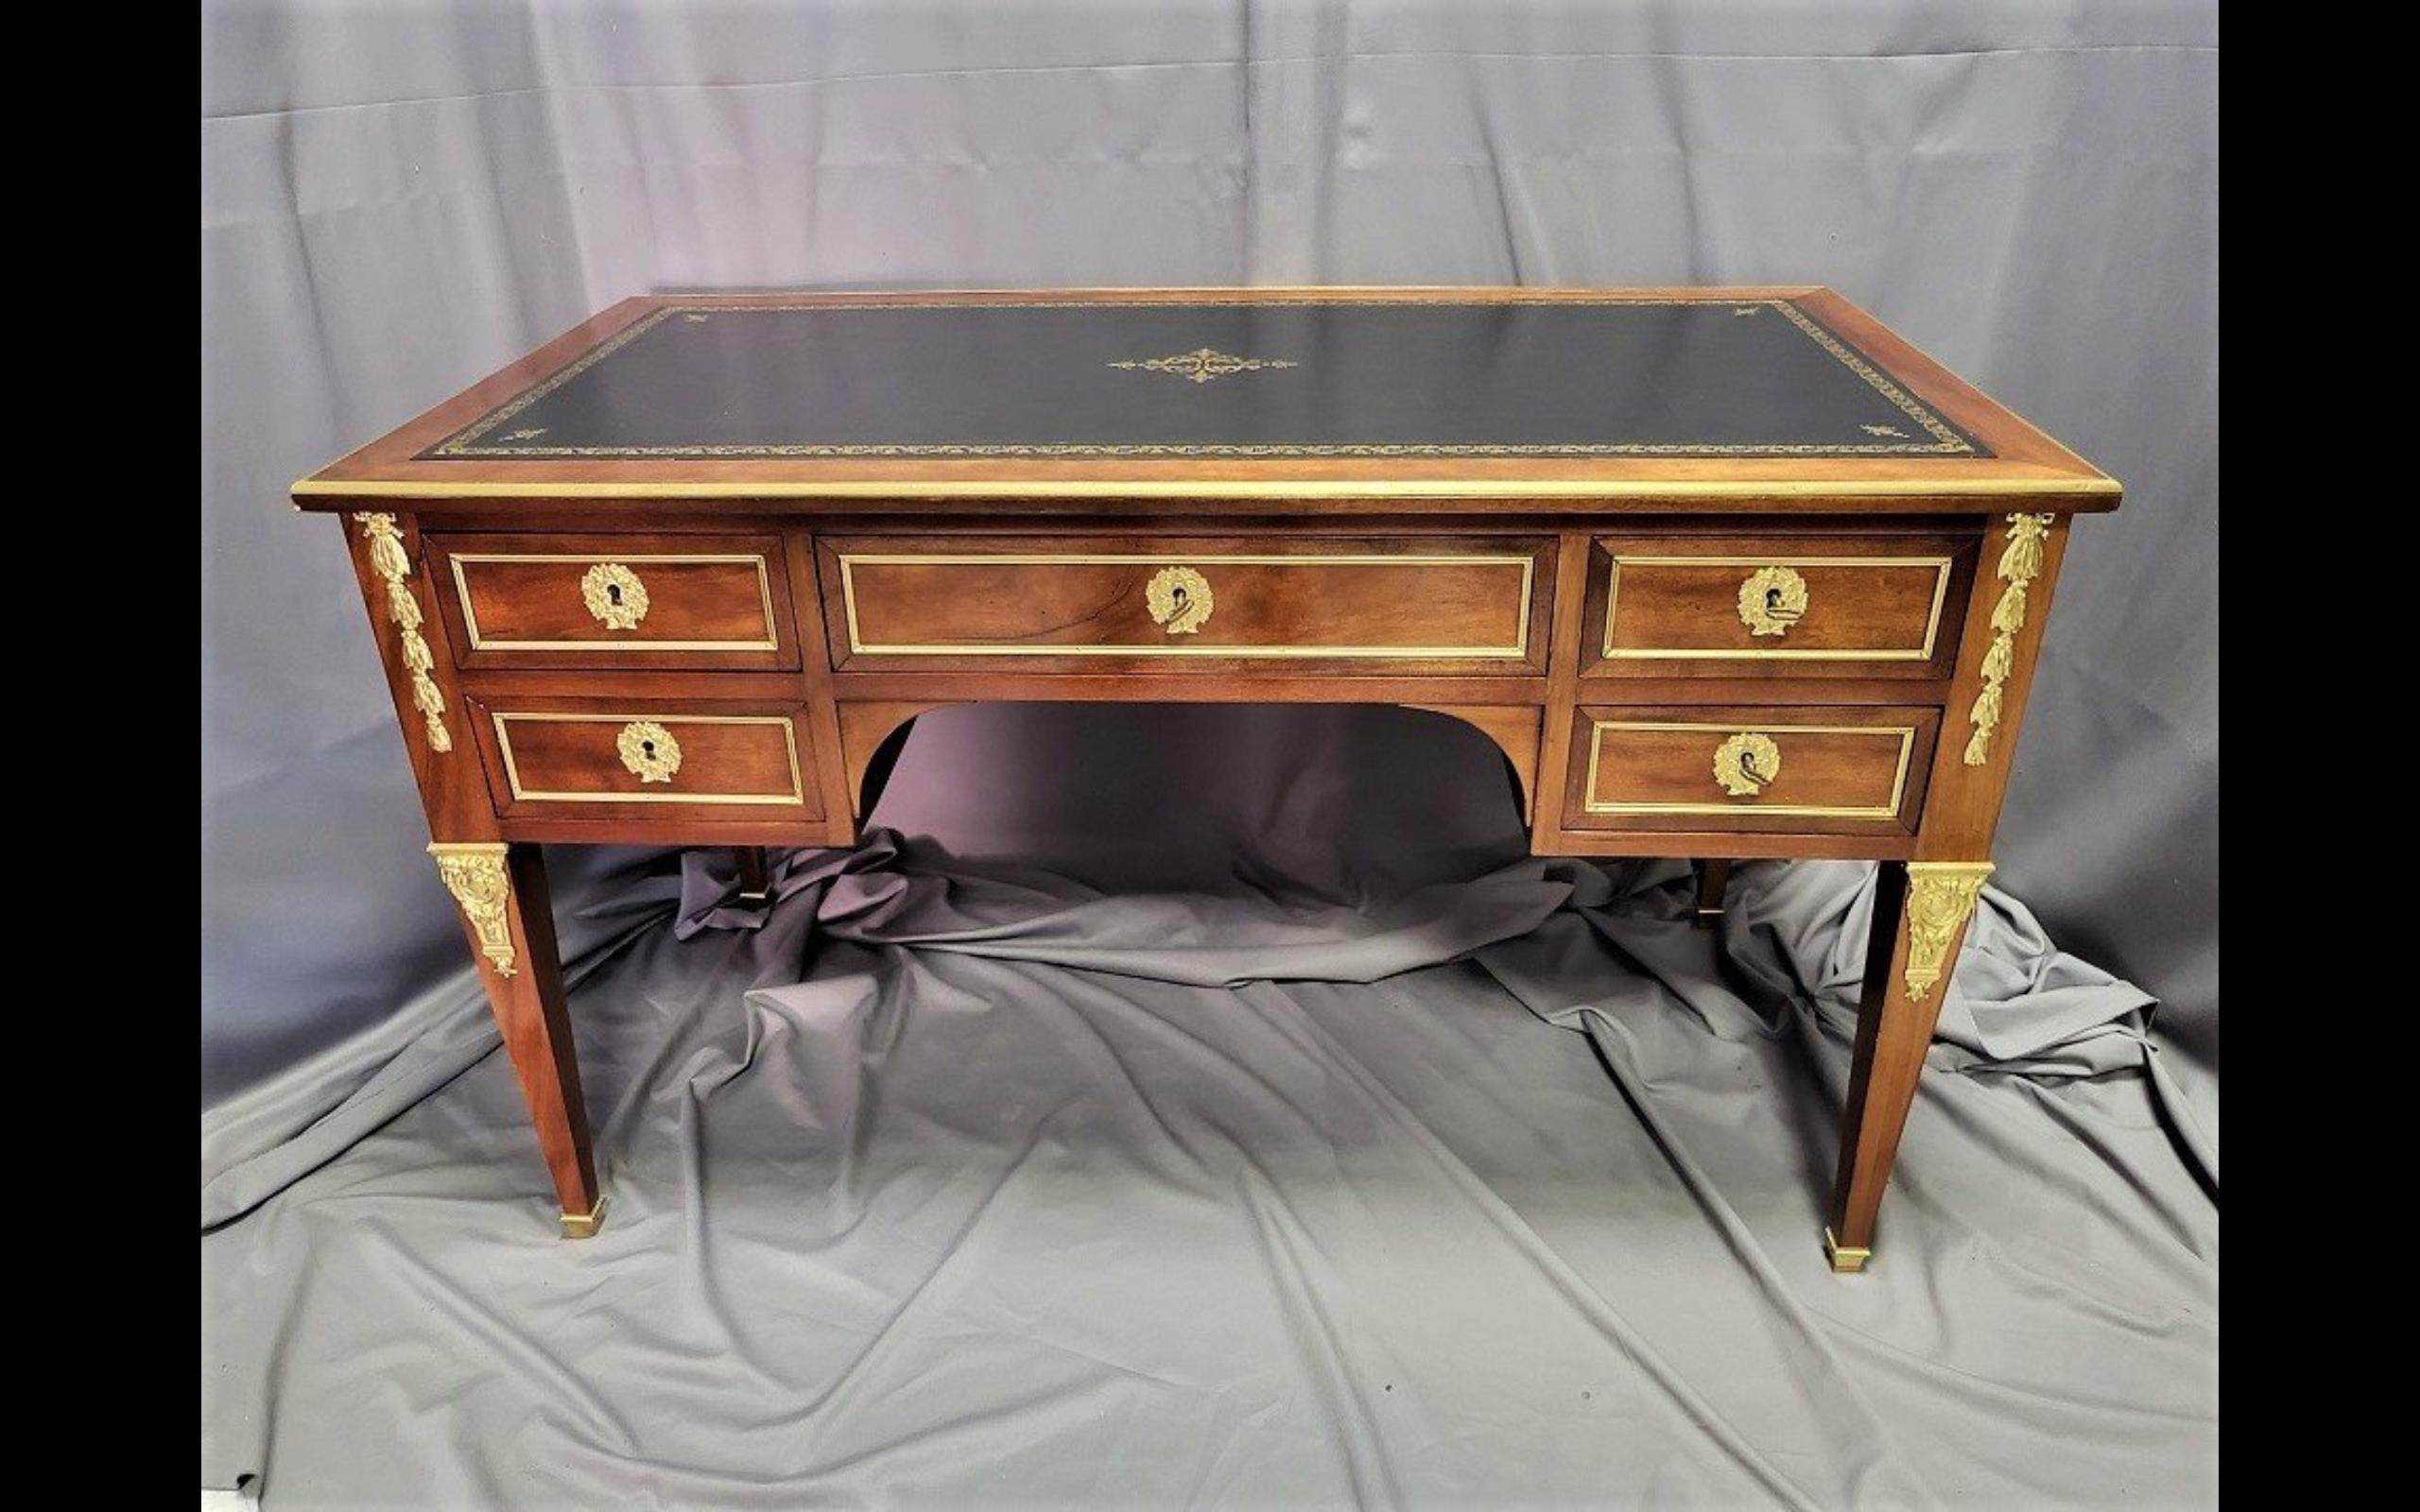 Table desk with drawbars decorated with bronzes from the Napoleon III period and Boulle style.
Beautiful desk with 2 opening side parts.
Full walnut veneer.
Important ornamentation of gilded bronzes with ingot molds, patterns on the sides and